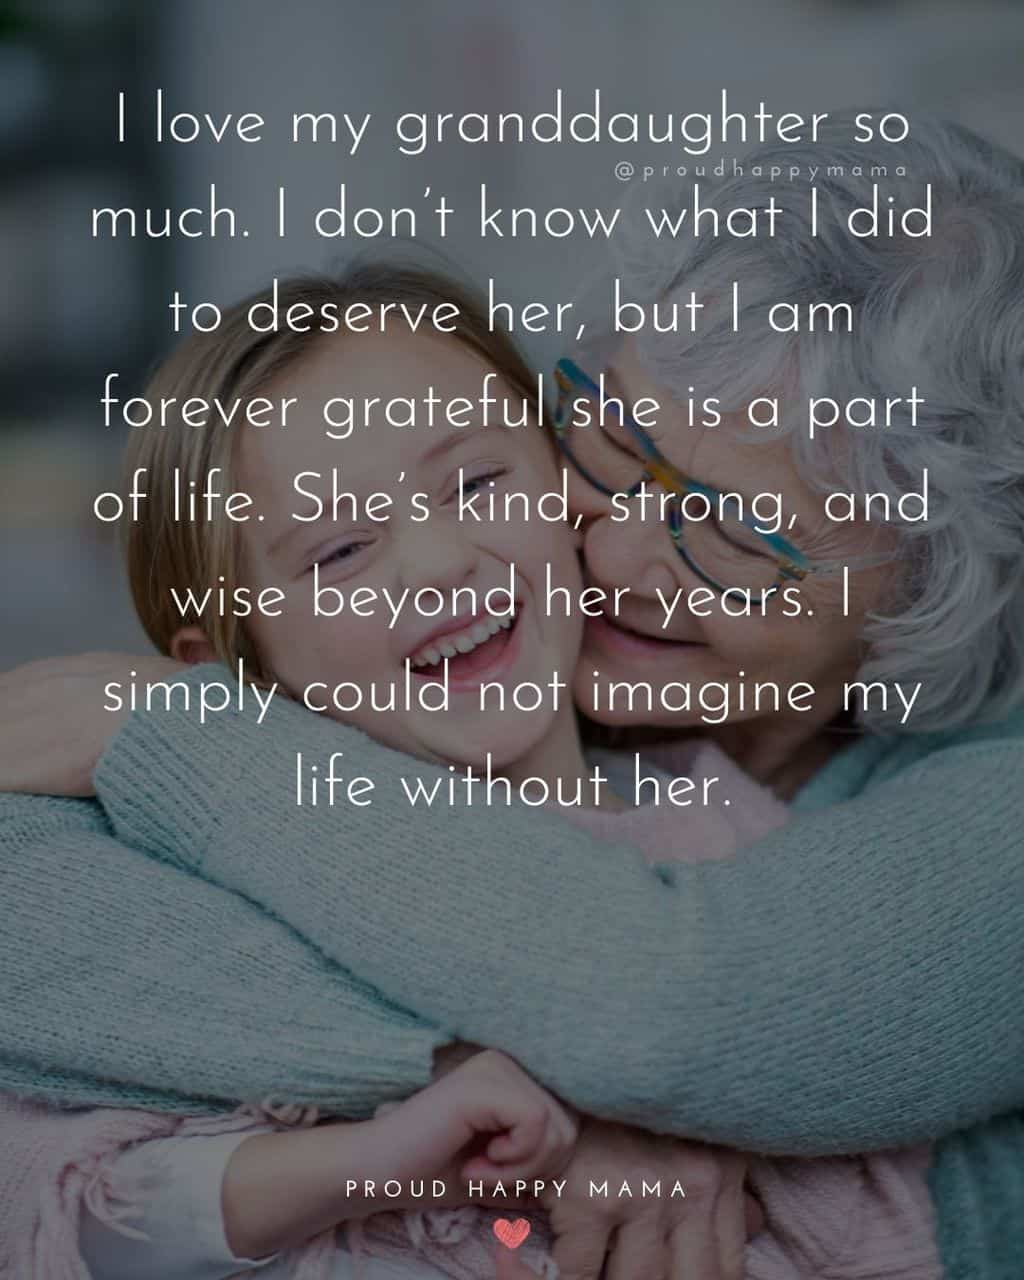 Granddaughter Quotes - I love my granddaughter so much. I don’t know what I did to deserve her, but I am forever grateful